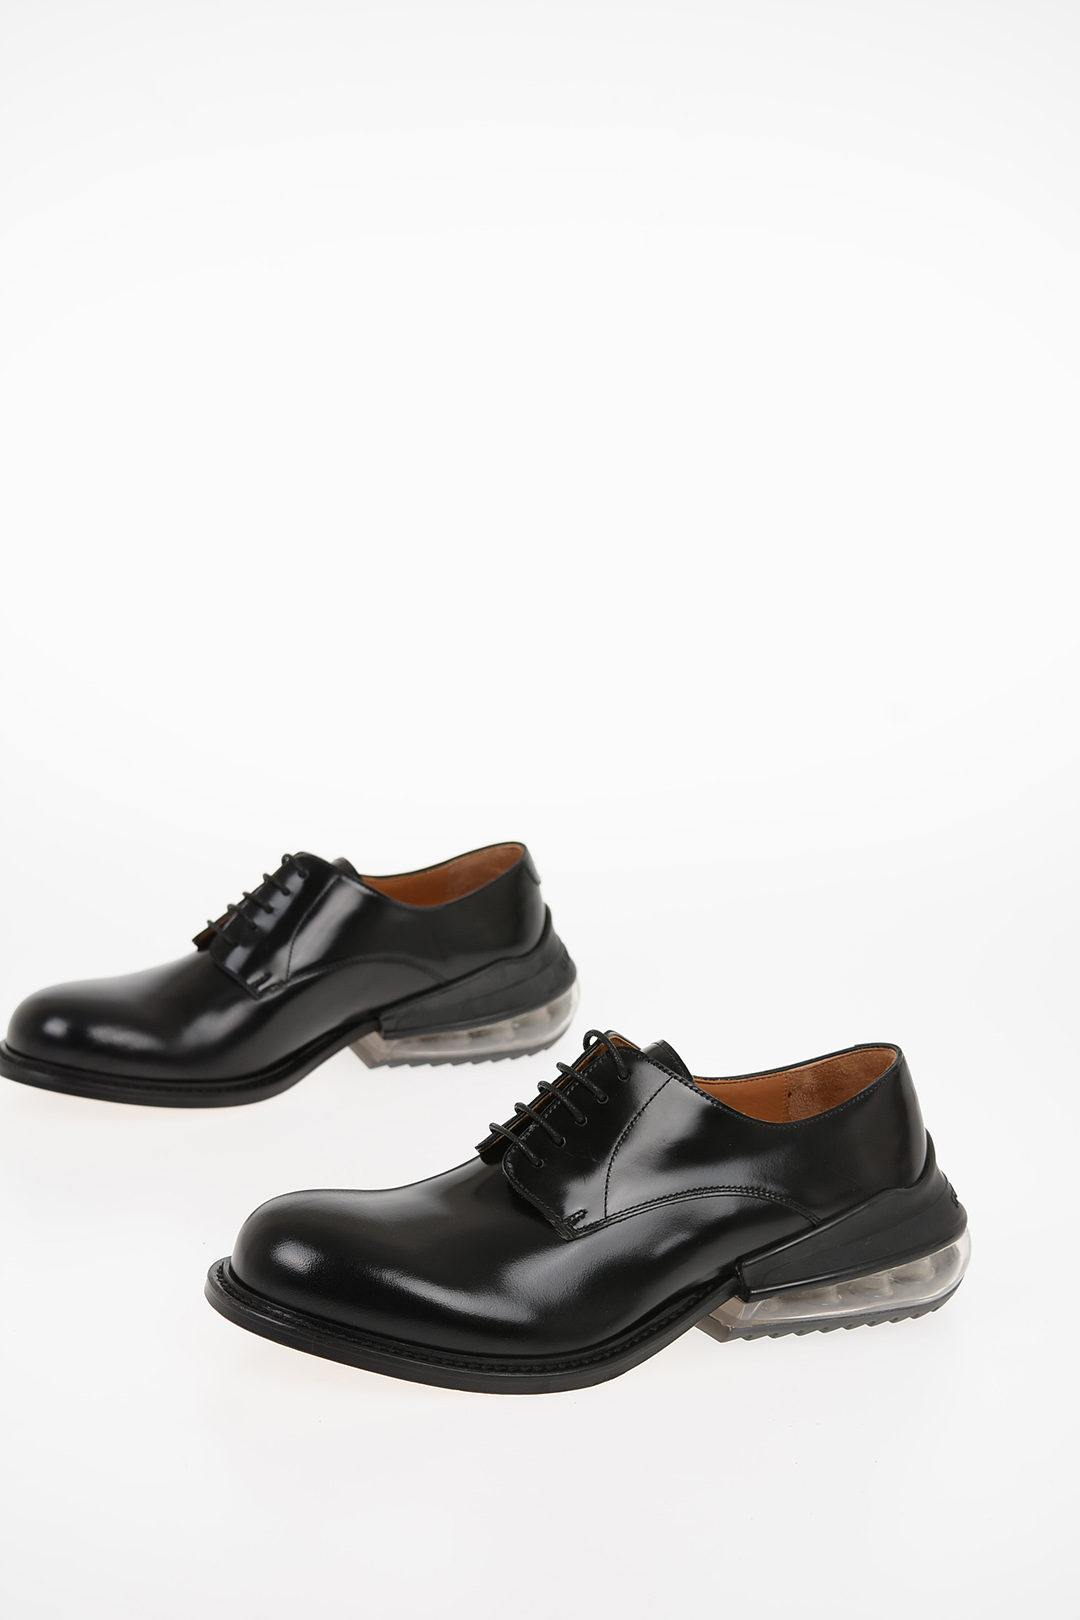 Maison Margiela MM22 Leather BOUNCE Derby Shoes with Air Bubble Heel ...